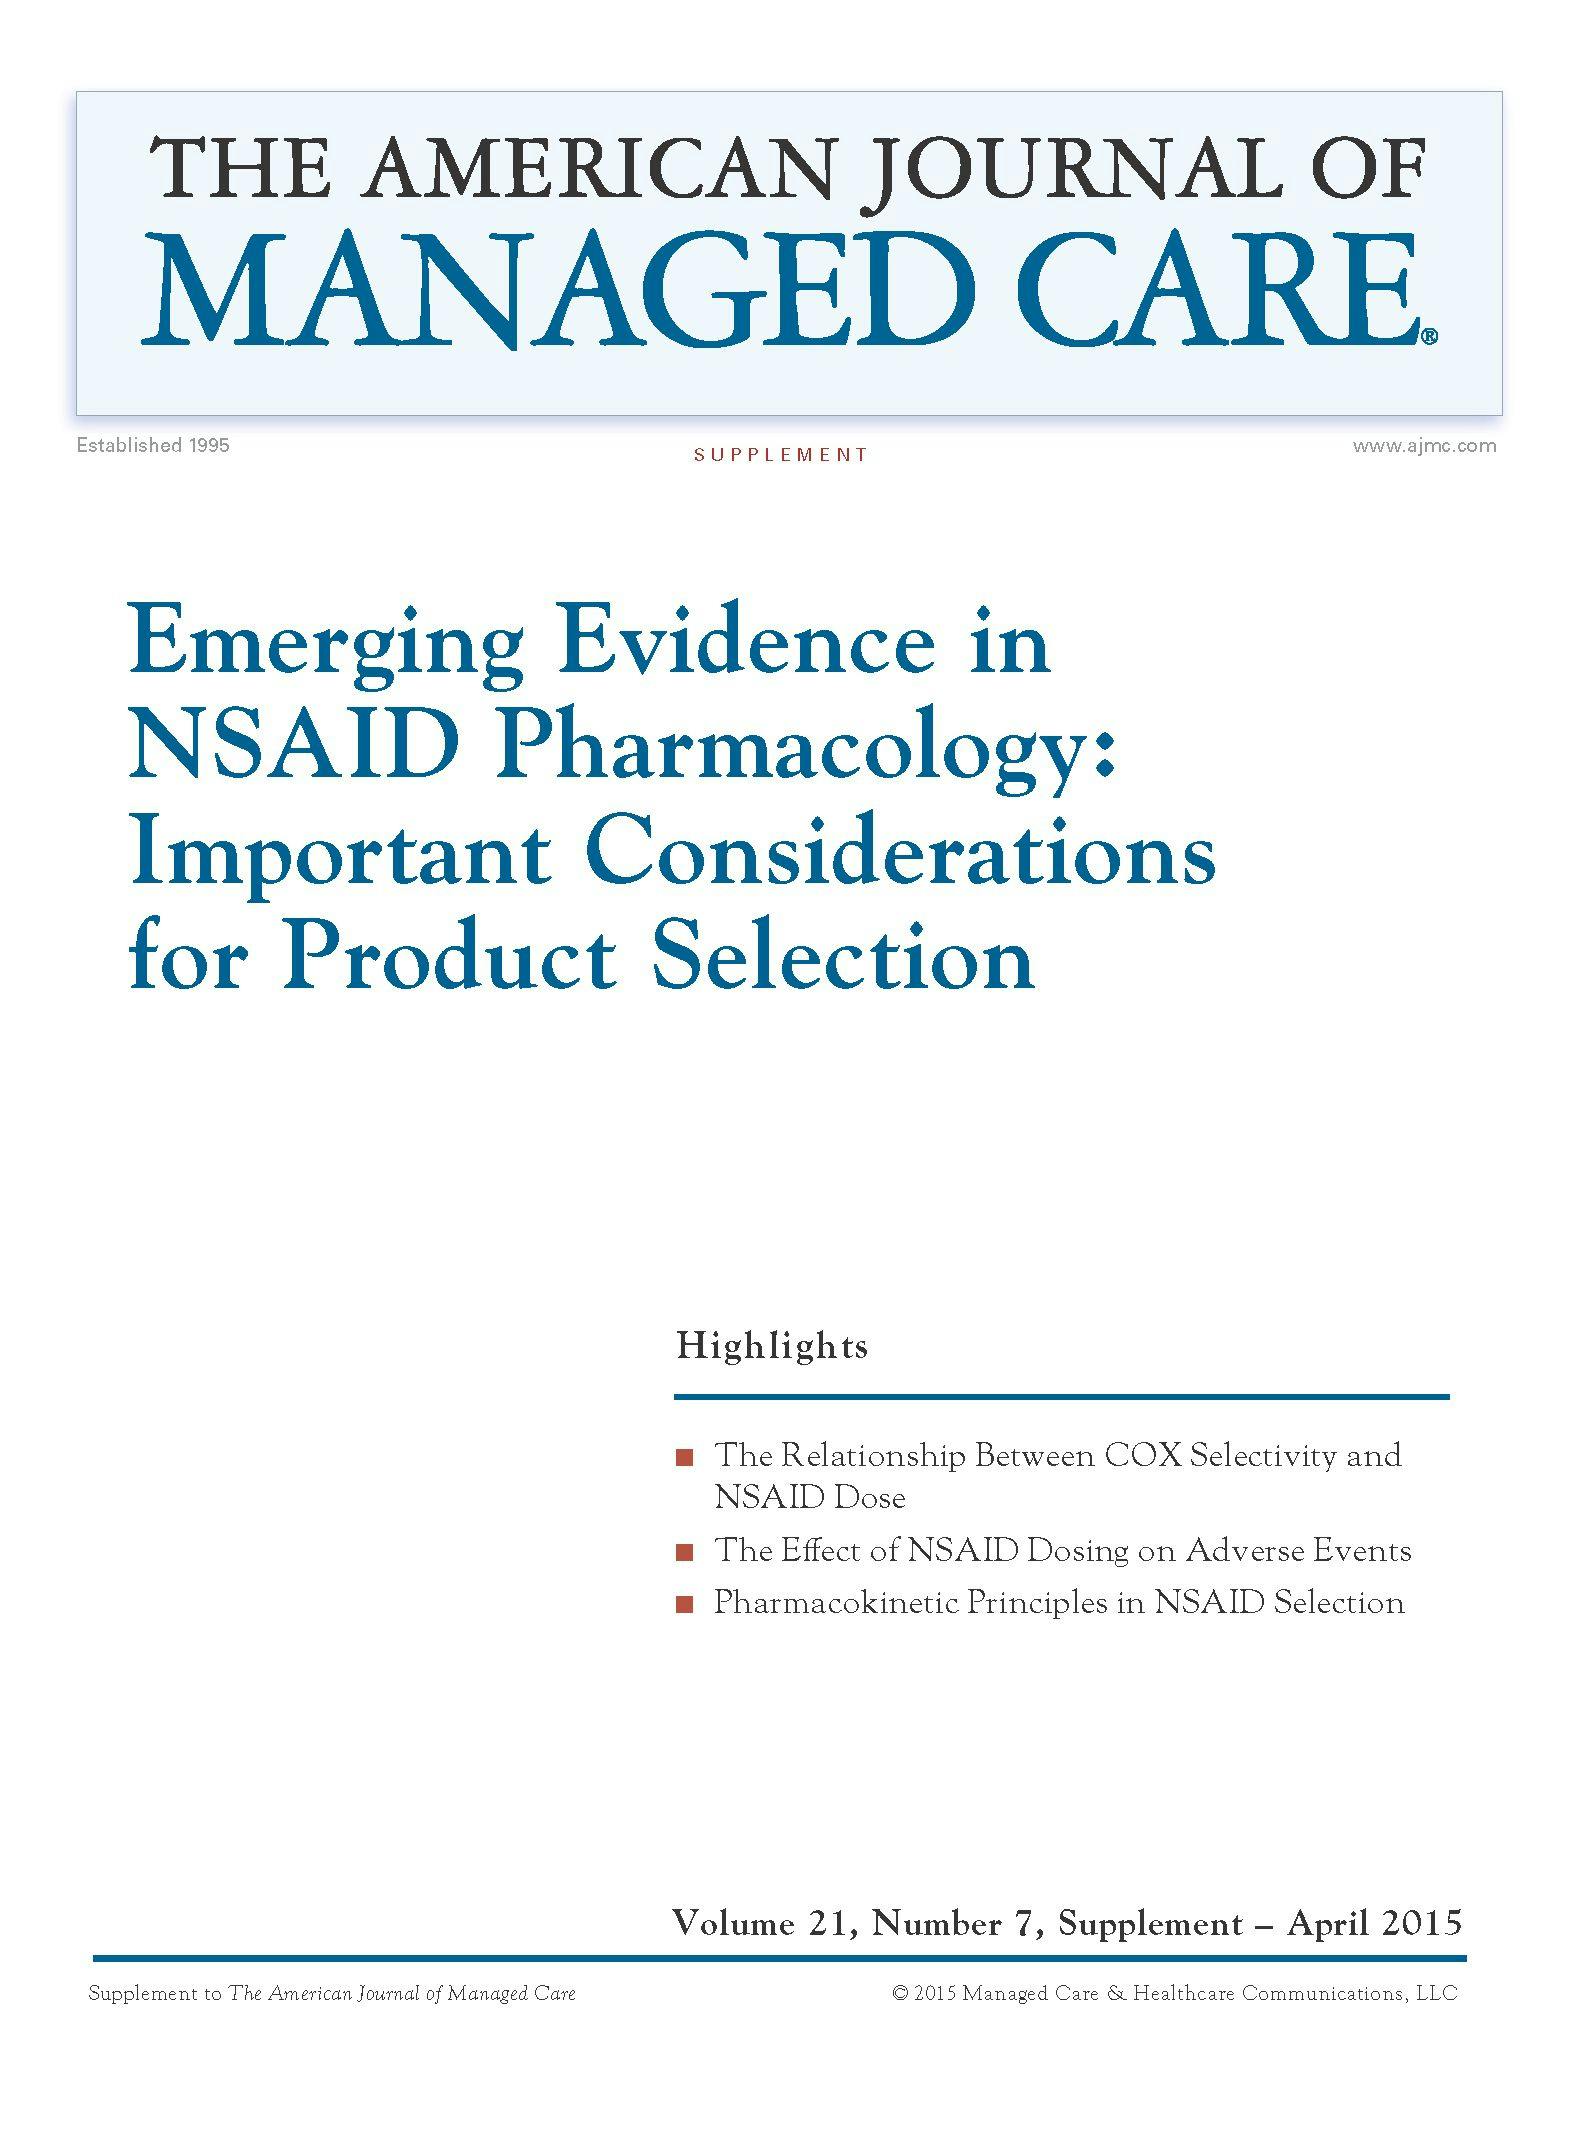 Emerging Evidence in NSAID Pharmacology: Important Considerations for Product Selection